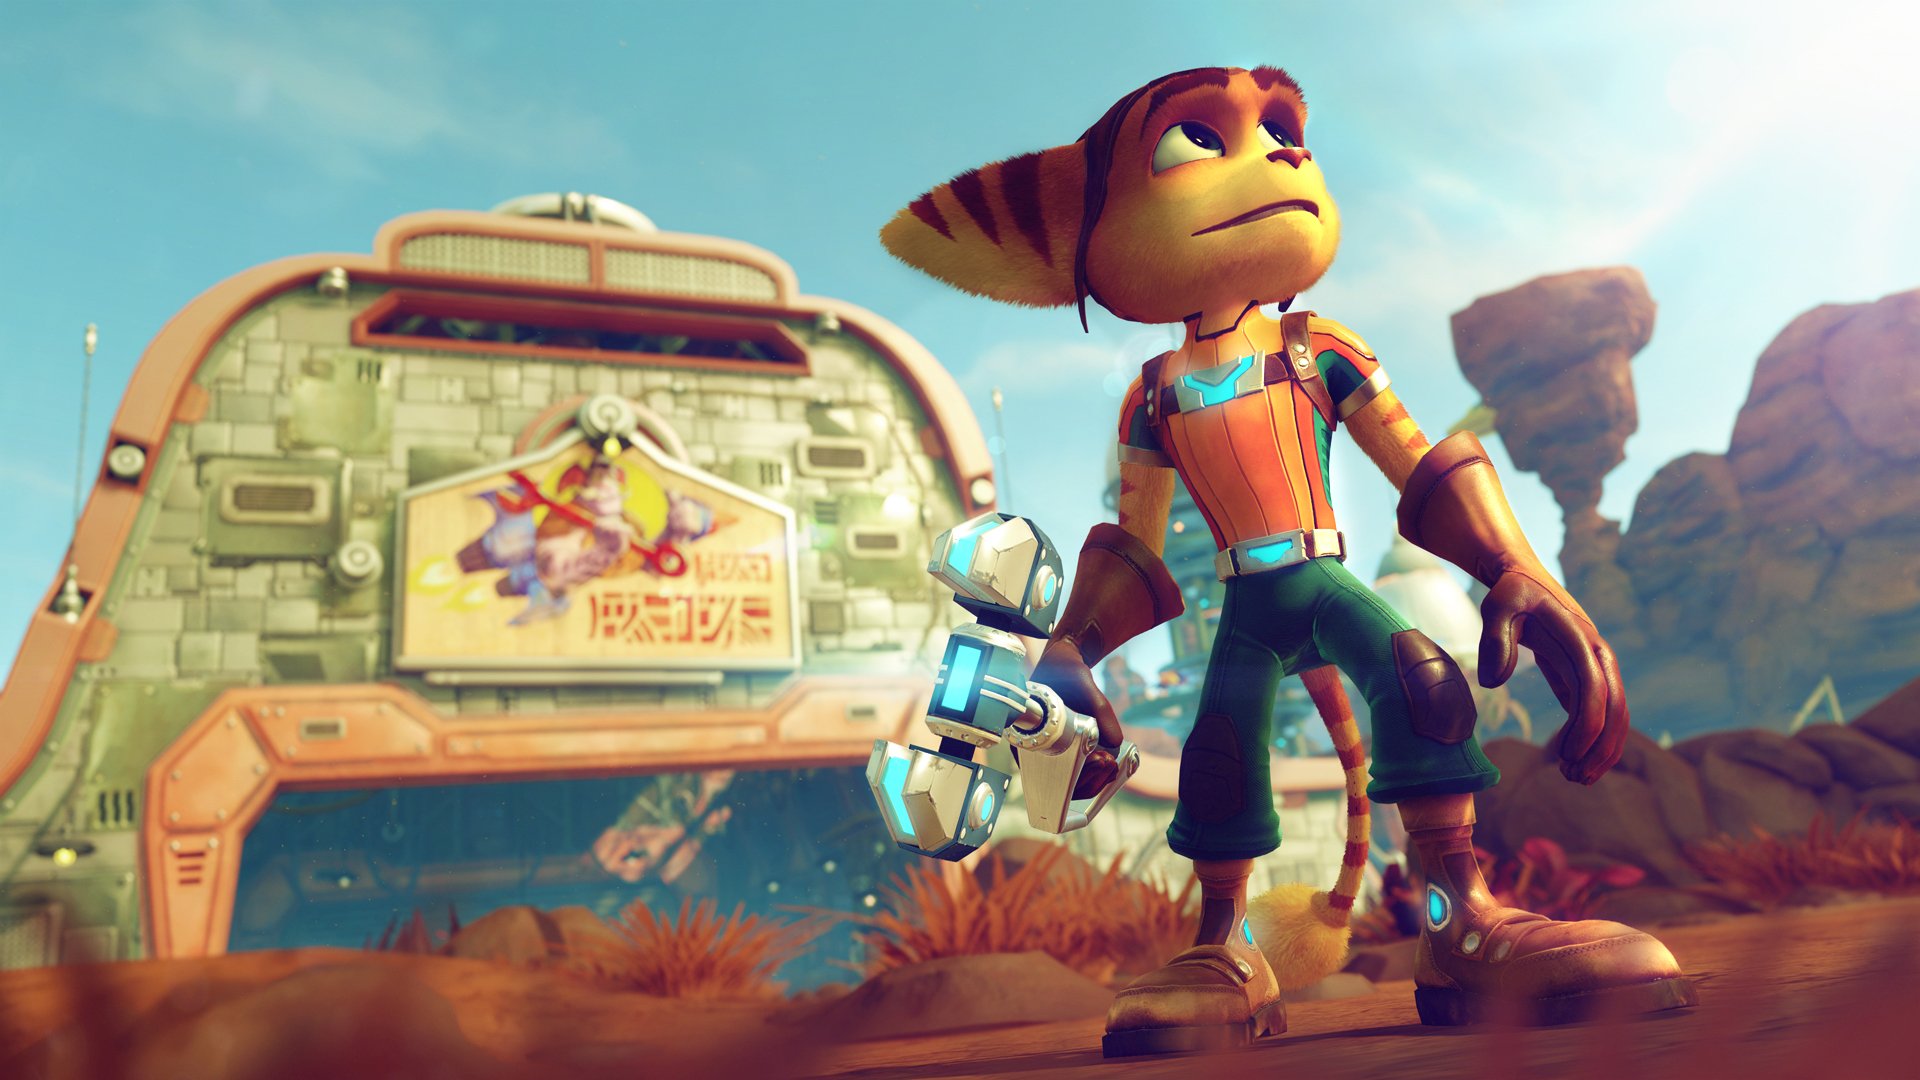 7. Ratchet & Clank launches April 12th on PS4. 